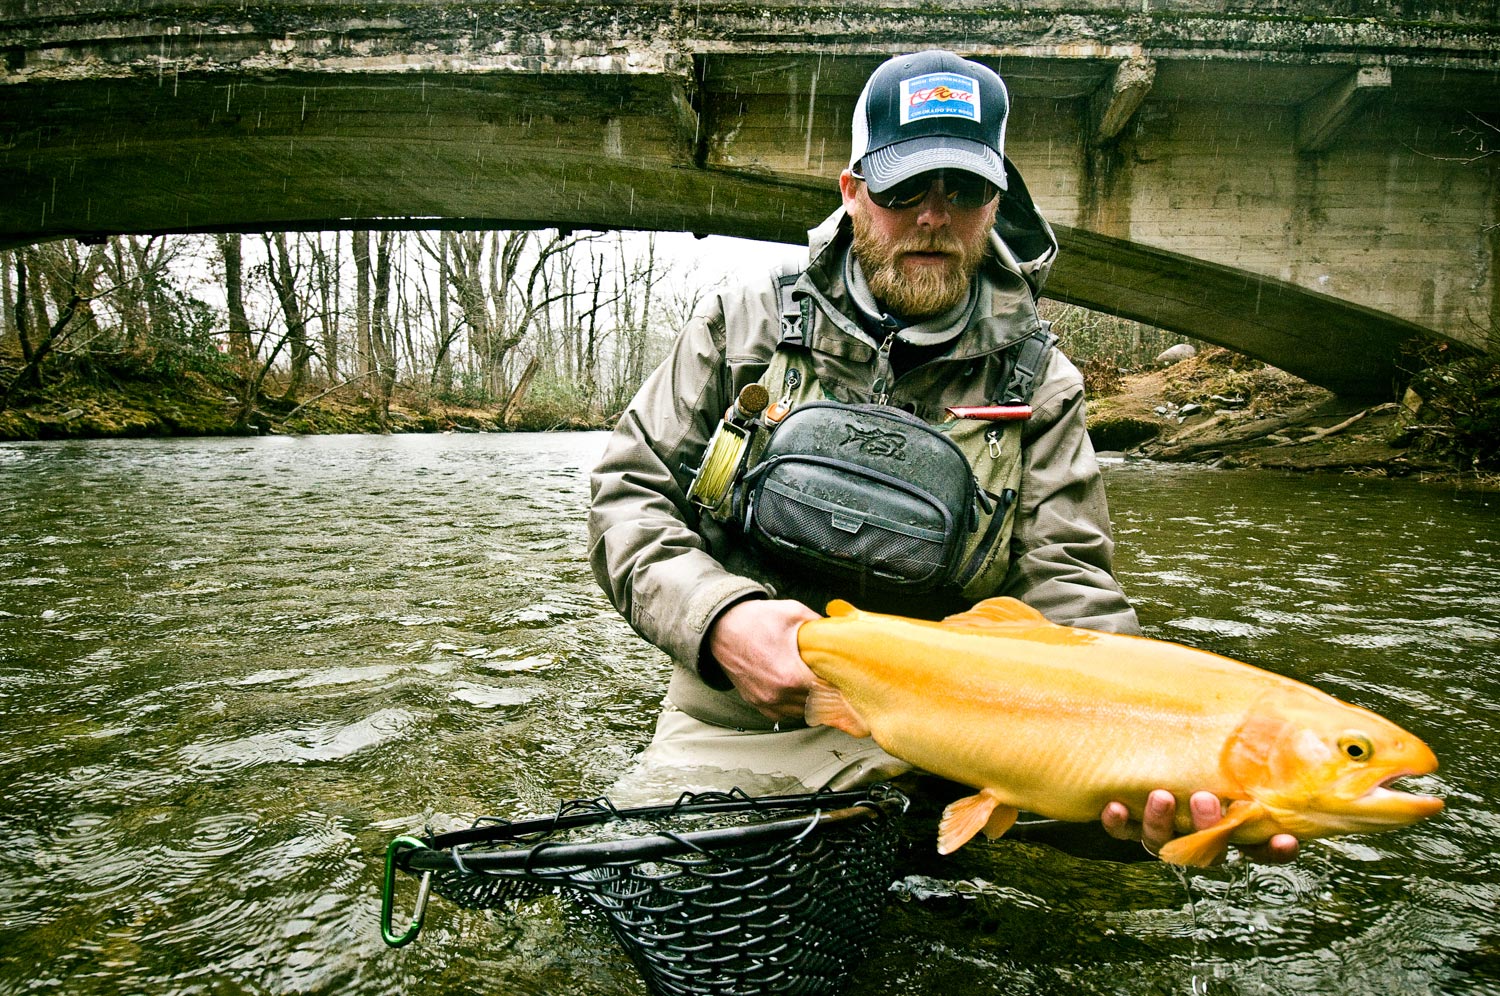 This is not a golden trout. Photo by Louis Cahill